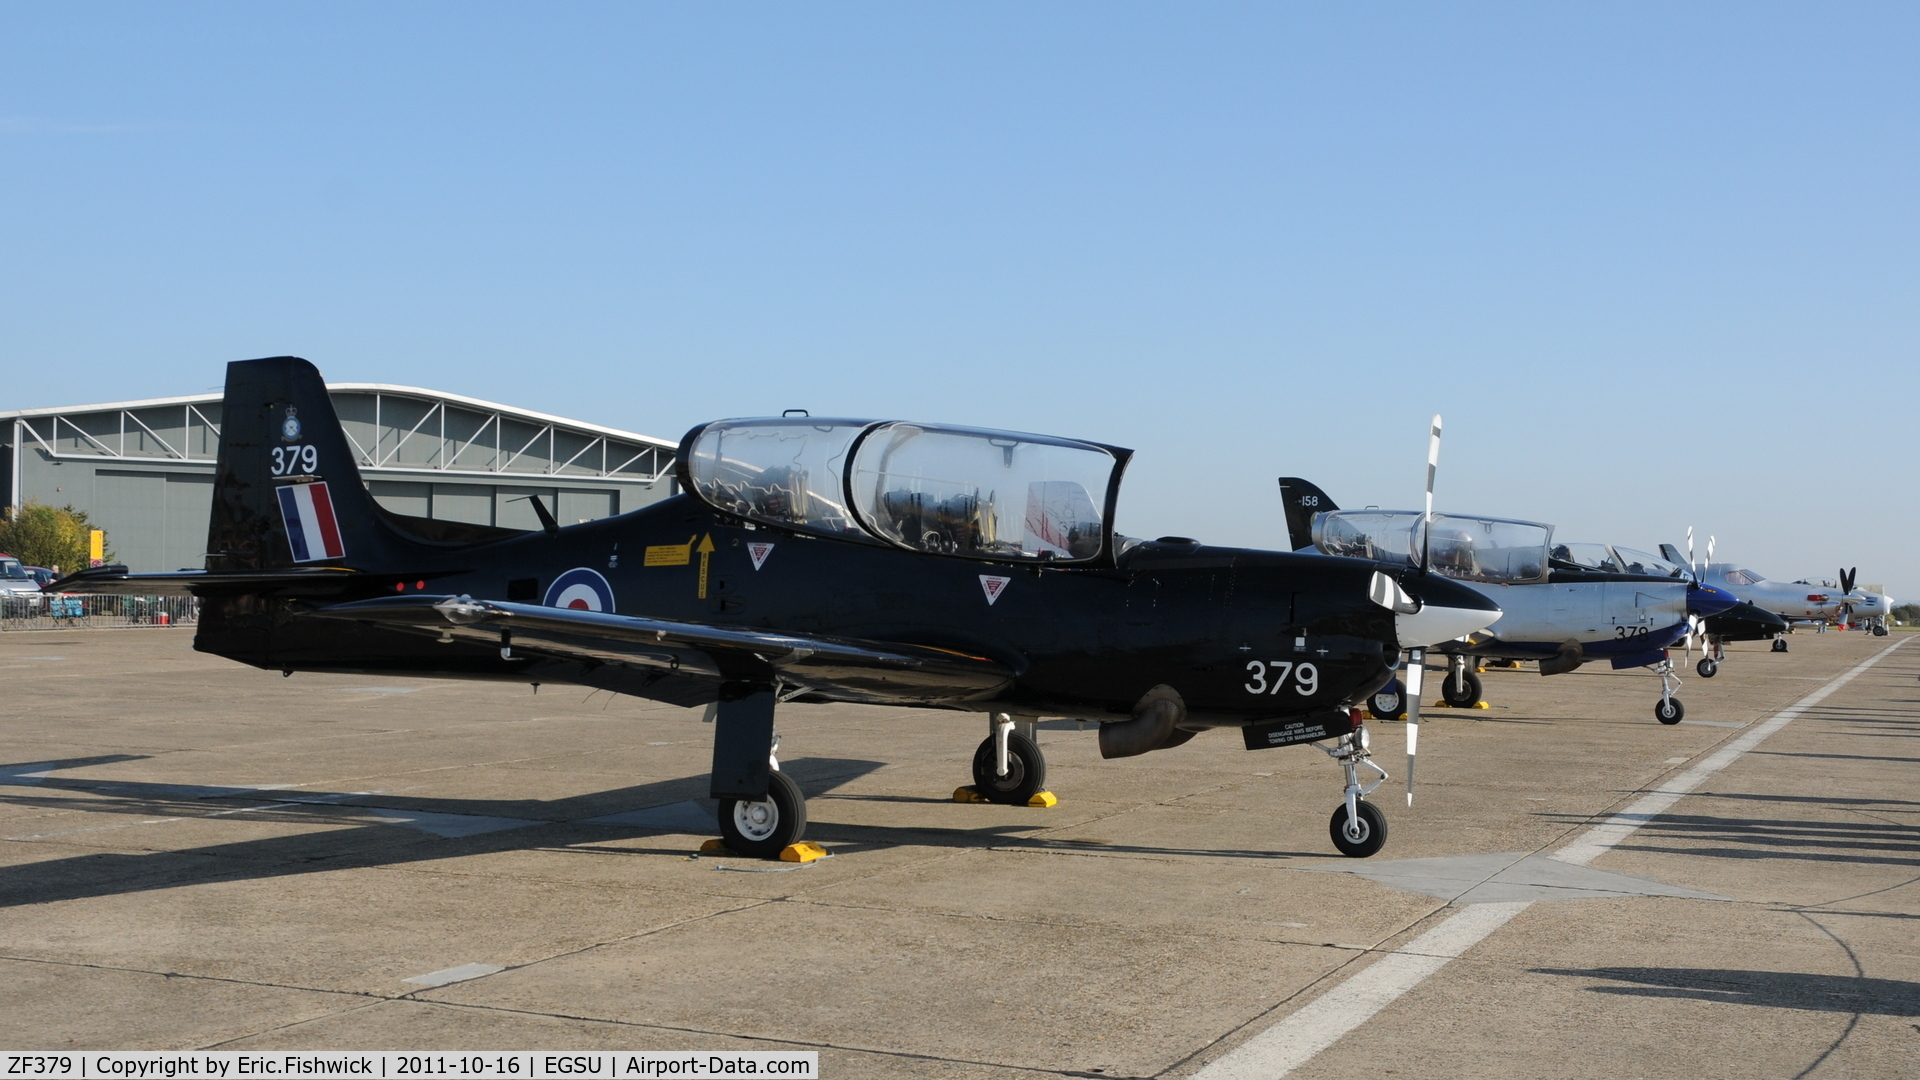 ZF379, 1992 Short S-312 Tucano T1 C/N S122/T93, 2. ZF379 at Duxford Autumn Air Show, October, 2011